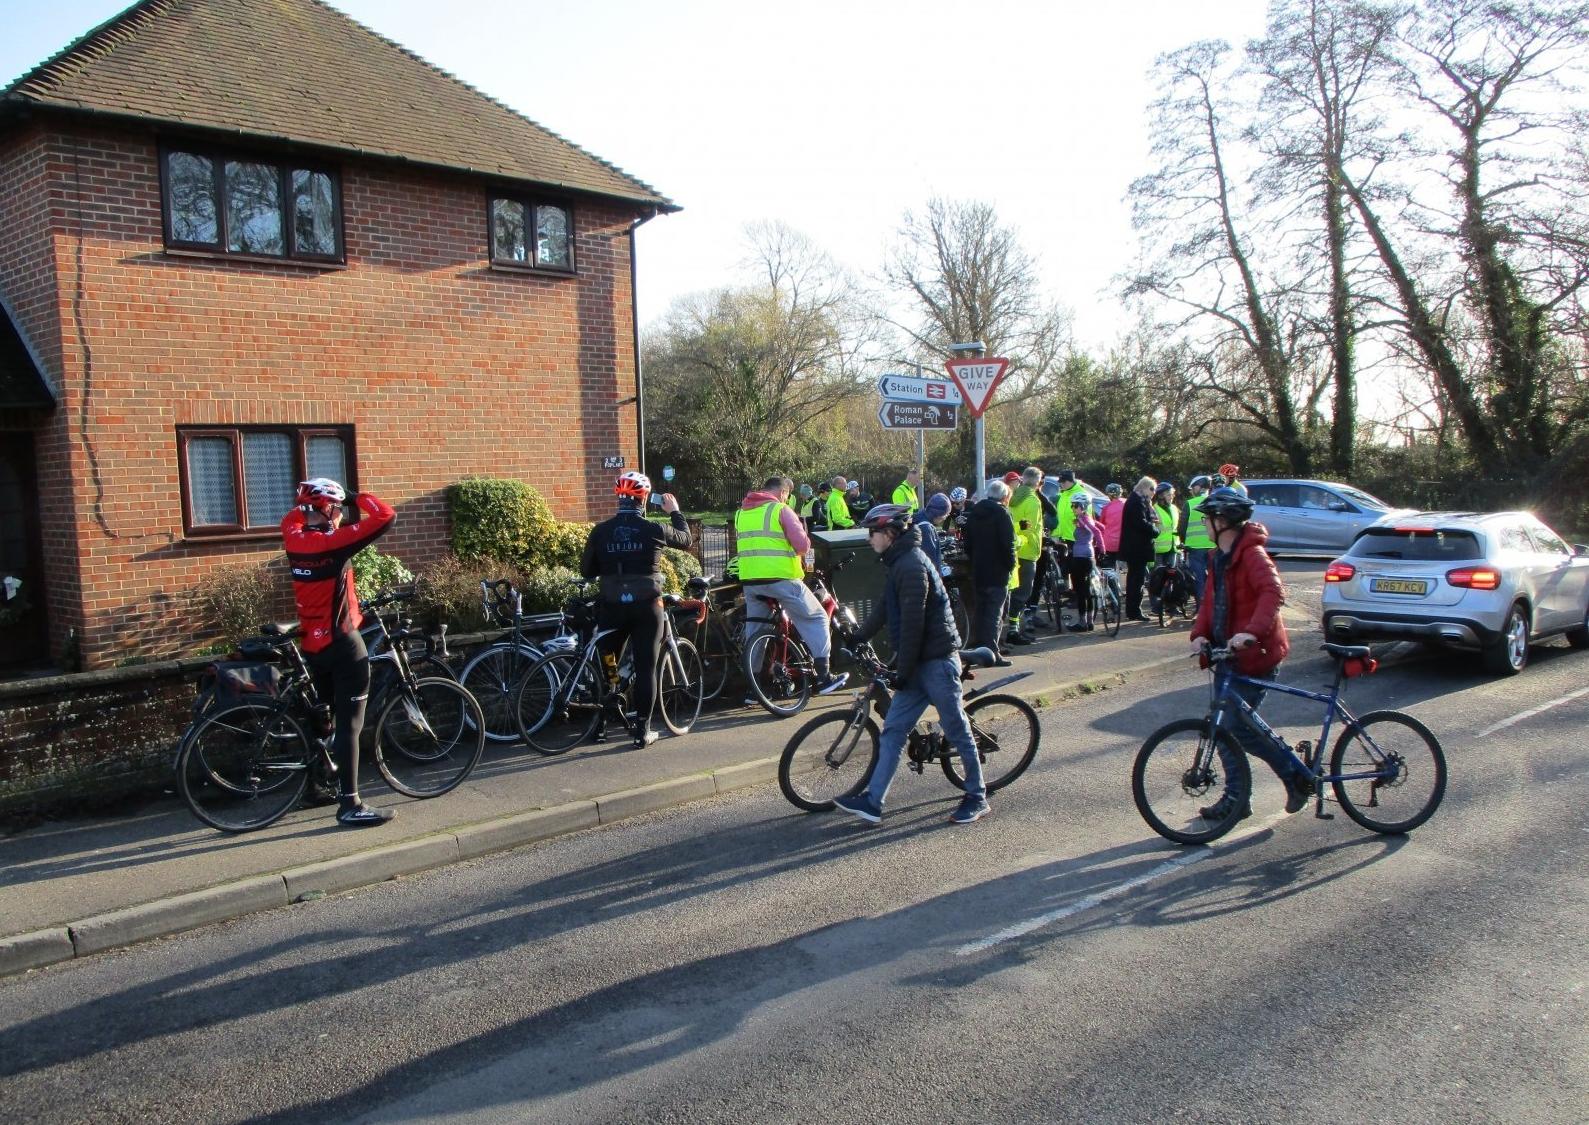 Following the death of well-known Bosham cyclist Gina McWilliam, a group of campaigners paid their respects and appealed for changes to the ‘inadequate’ road system at a well-attended event on Sunday. SUS-200122-104752001